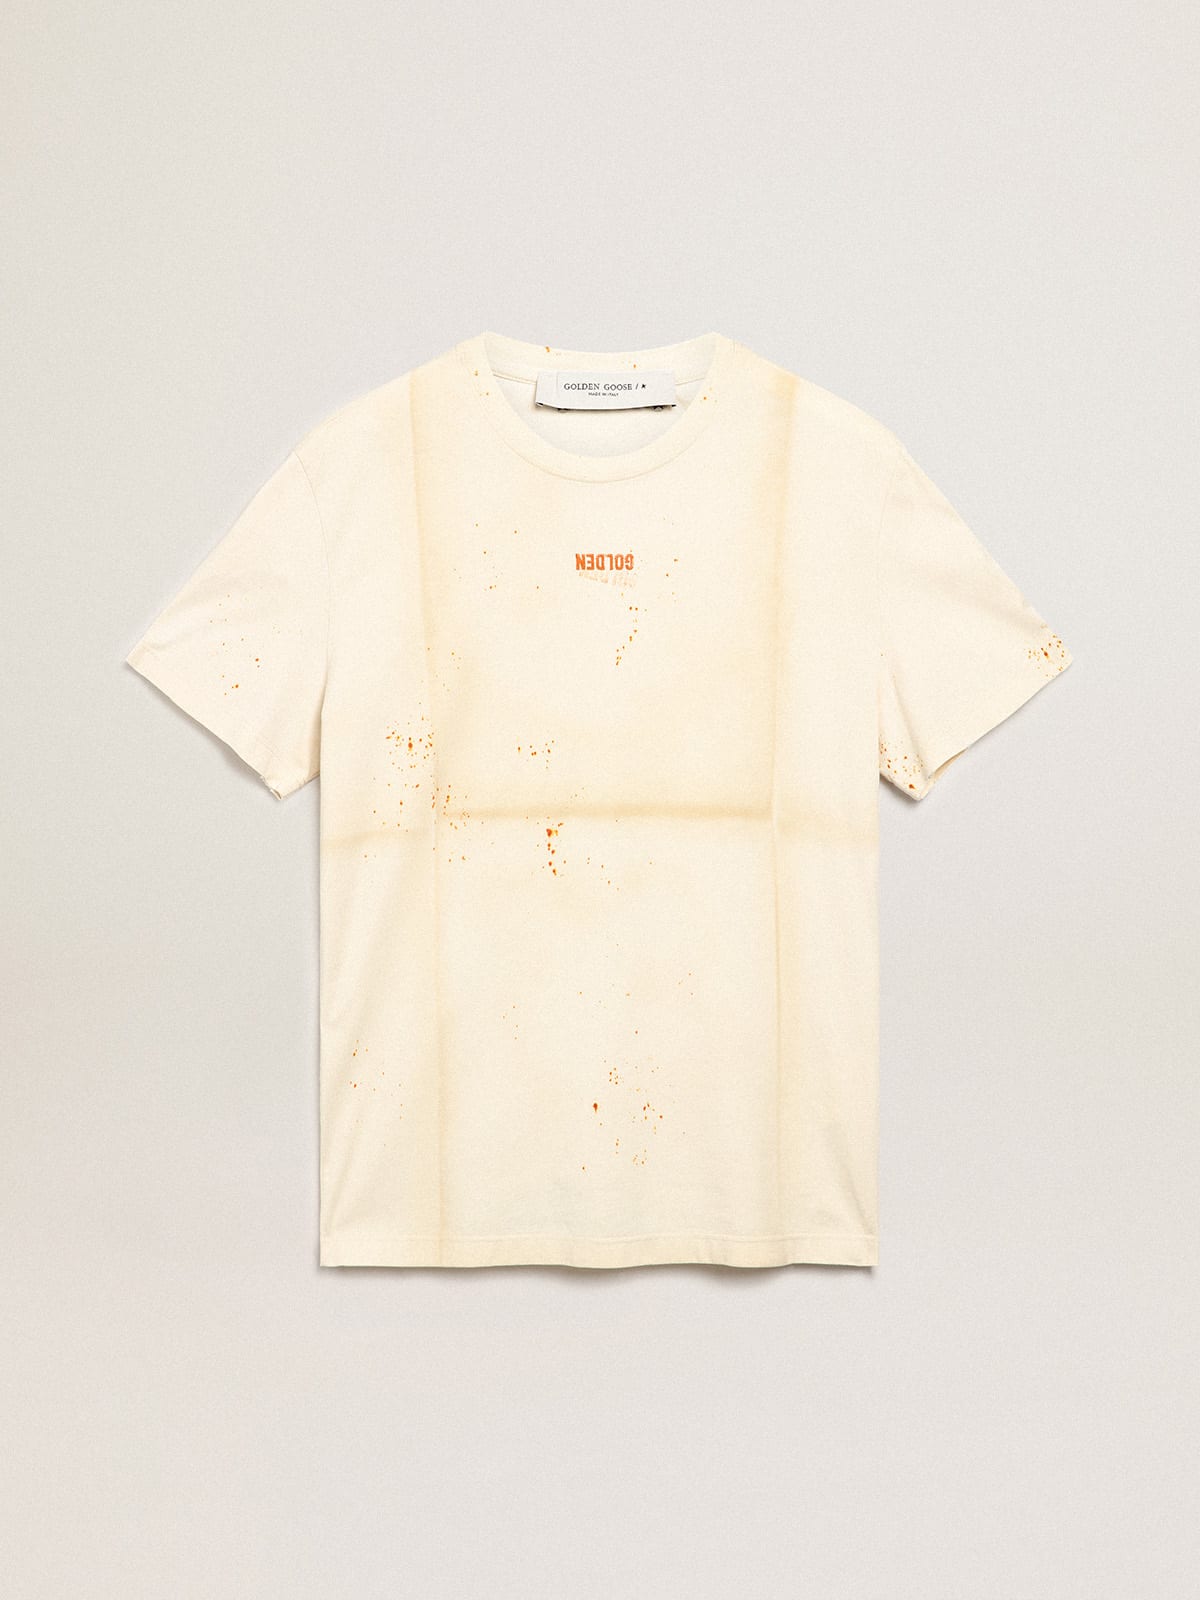 Bone-white Journey Collection T-shirt with a folded-garment effect with Golden lettering and rust-colored spray